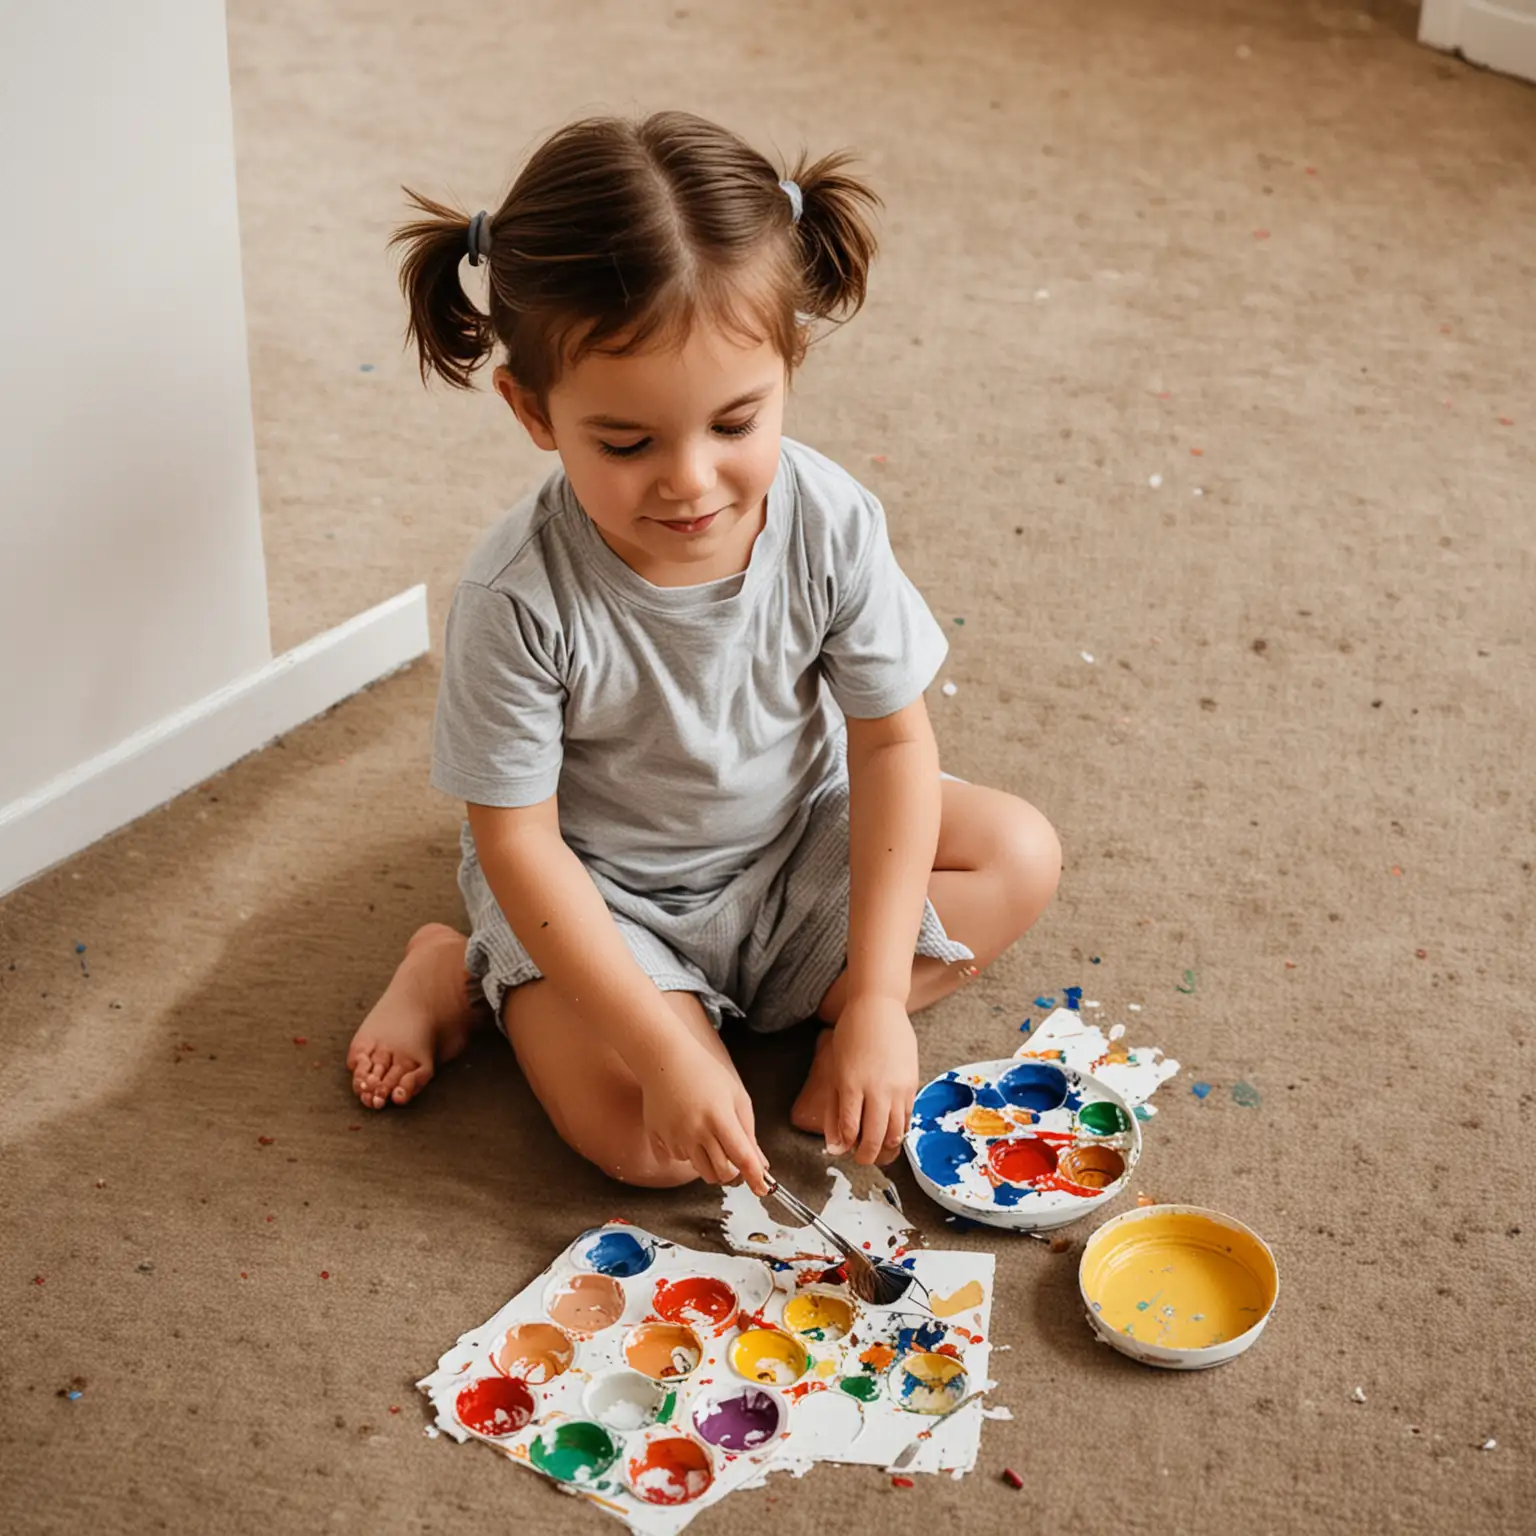 a child sitting on the floor painting and doing crafts